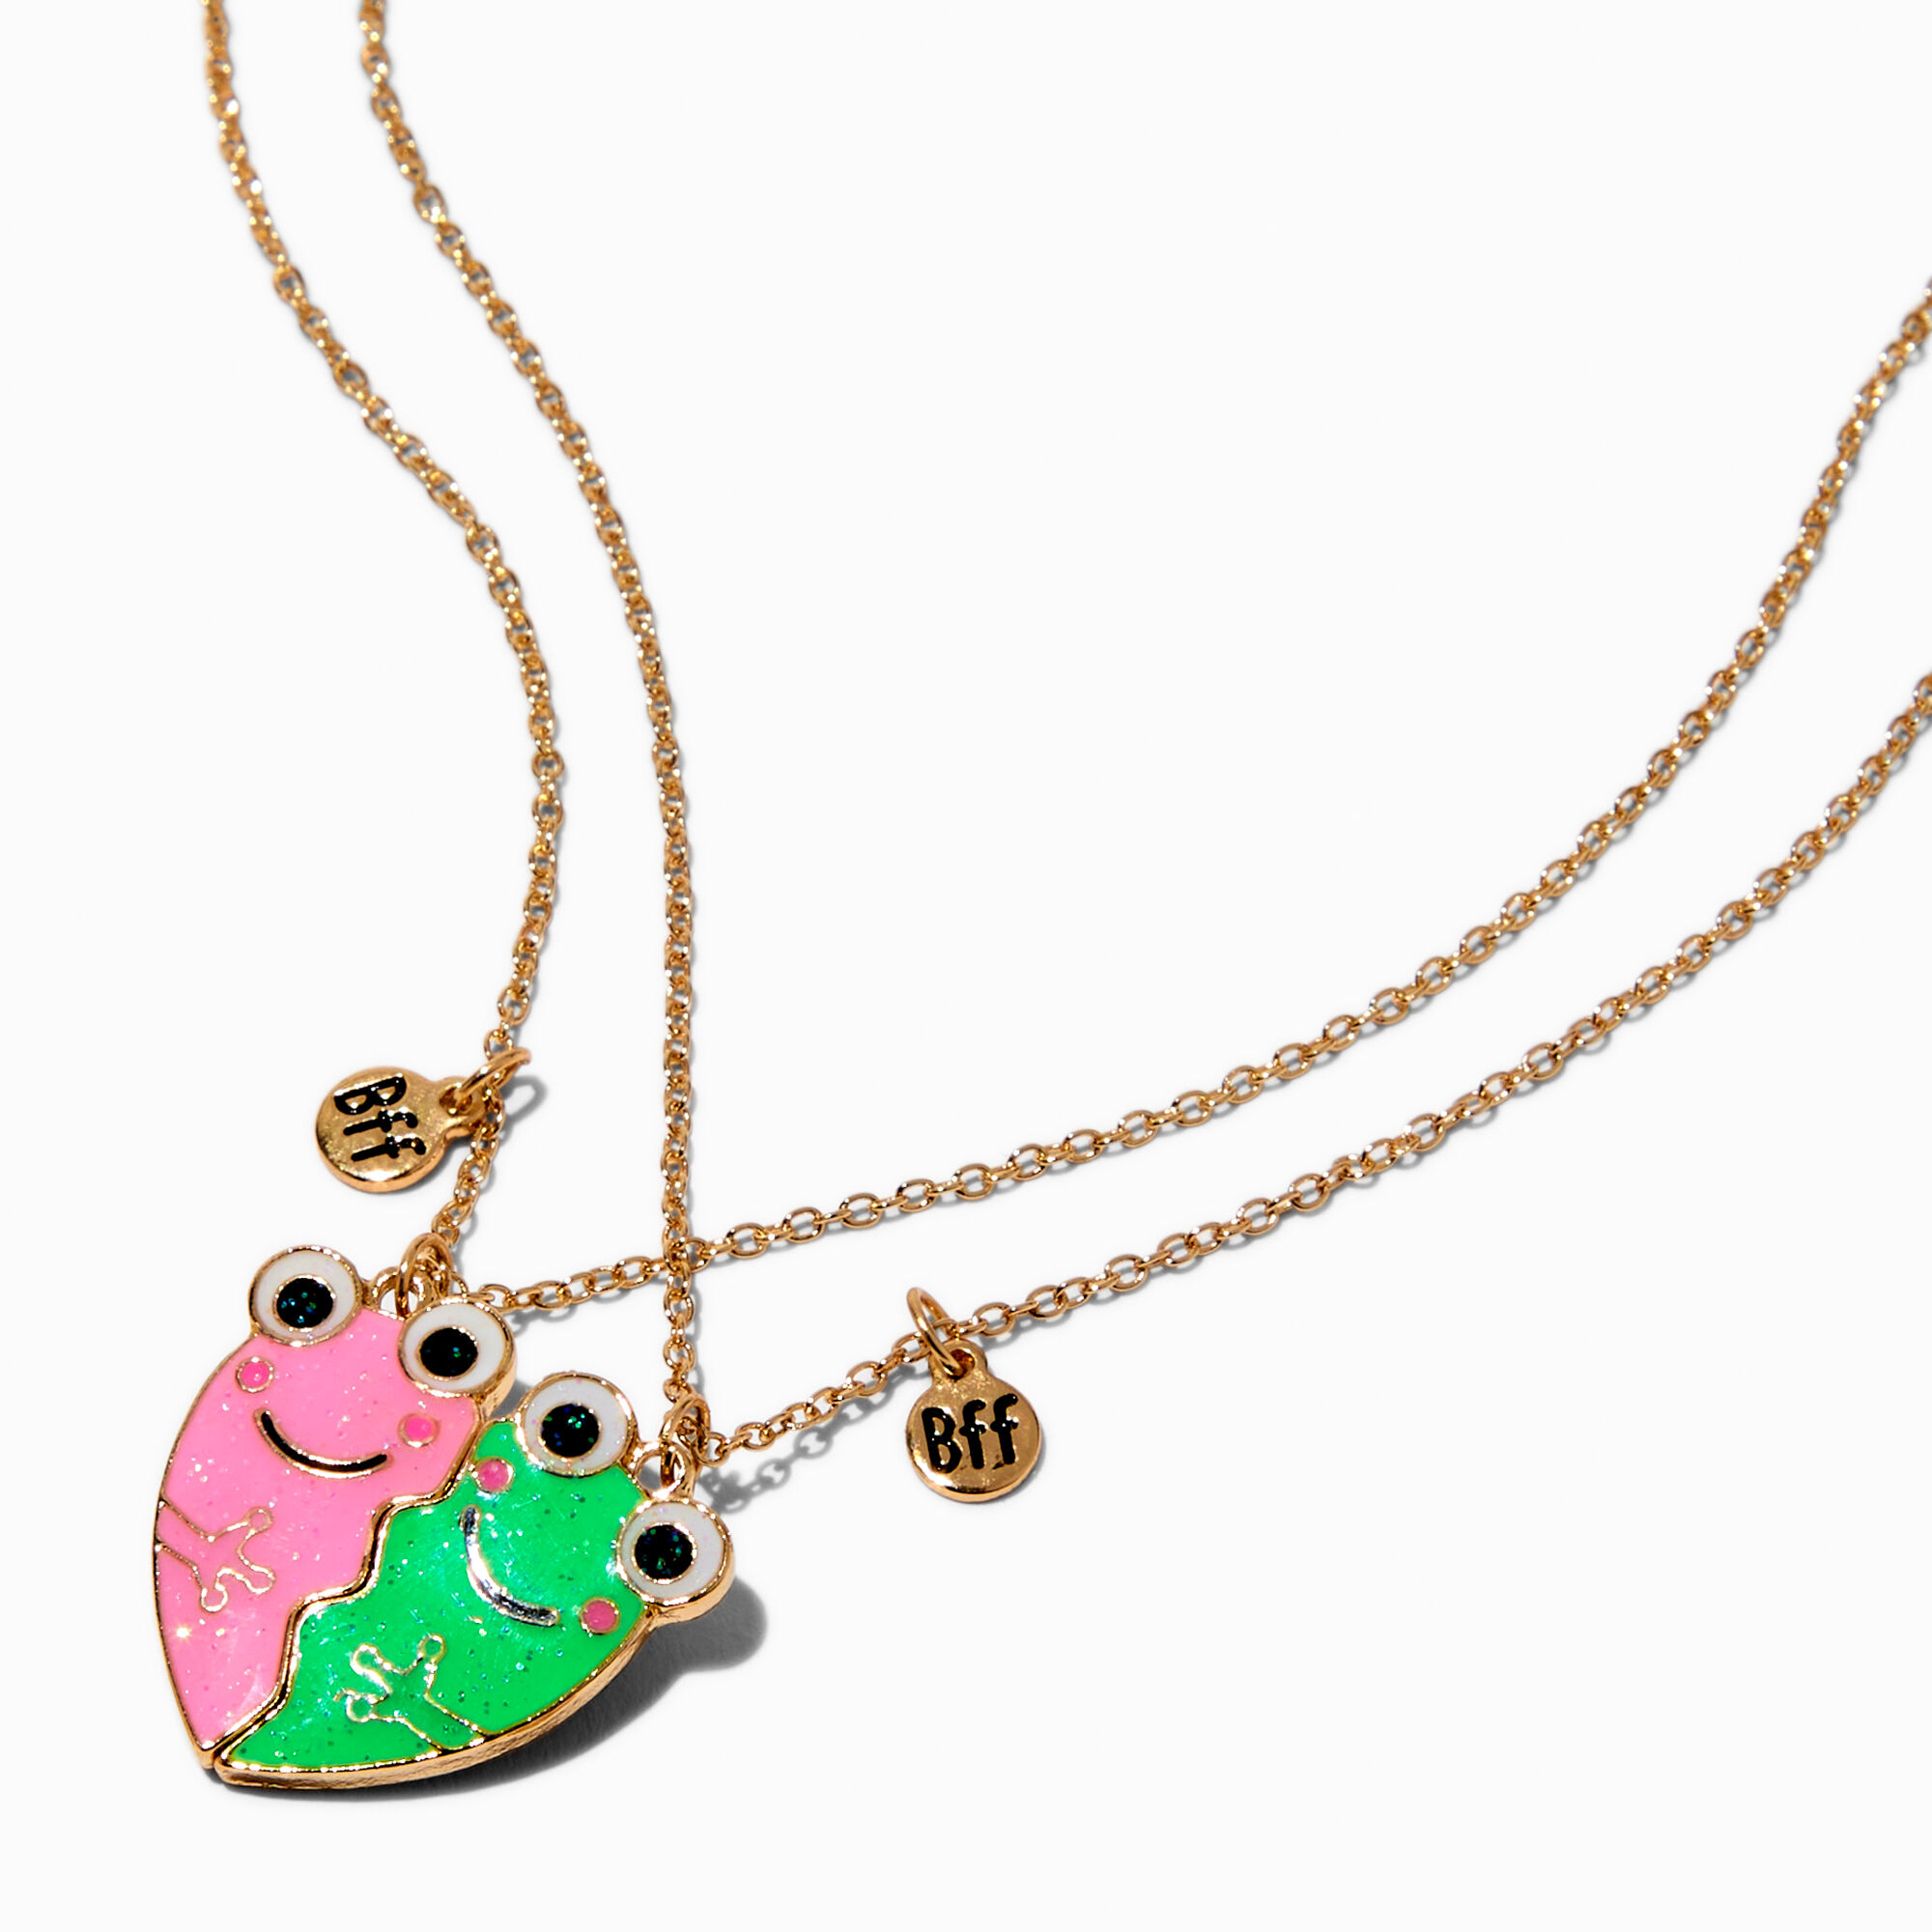 View Claires Best Friends Frog Glow In The Dark Split Heart Pendant Necklaces 2 Pack Gold information